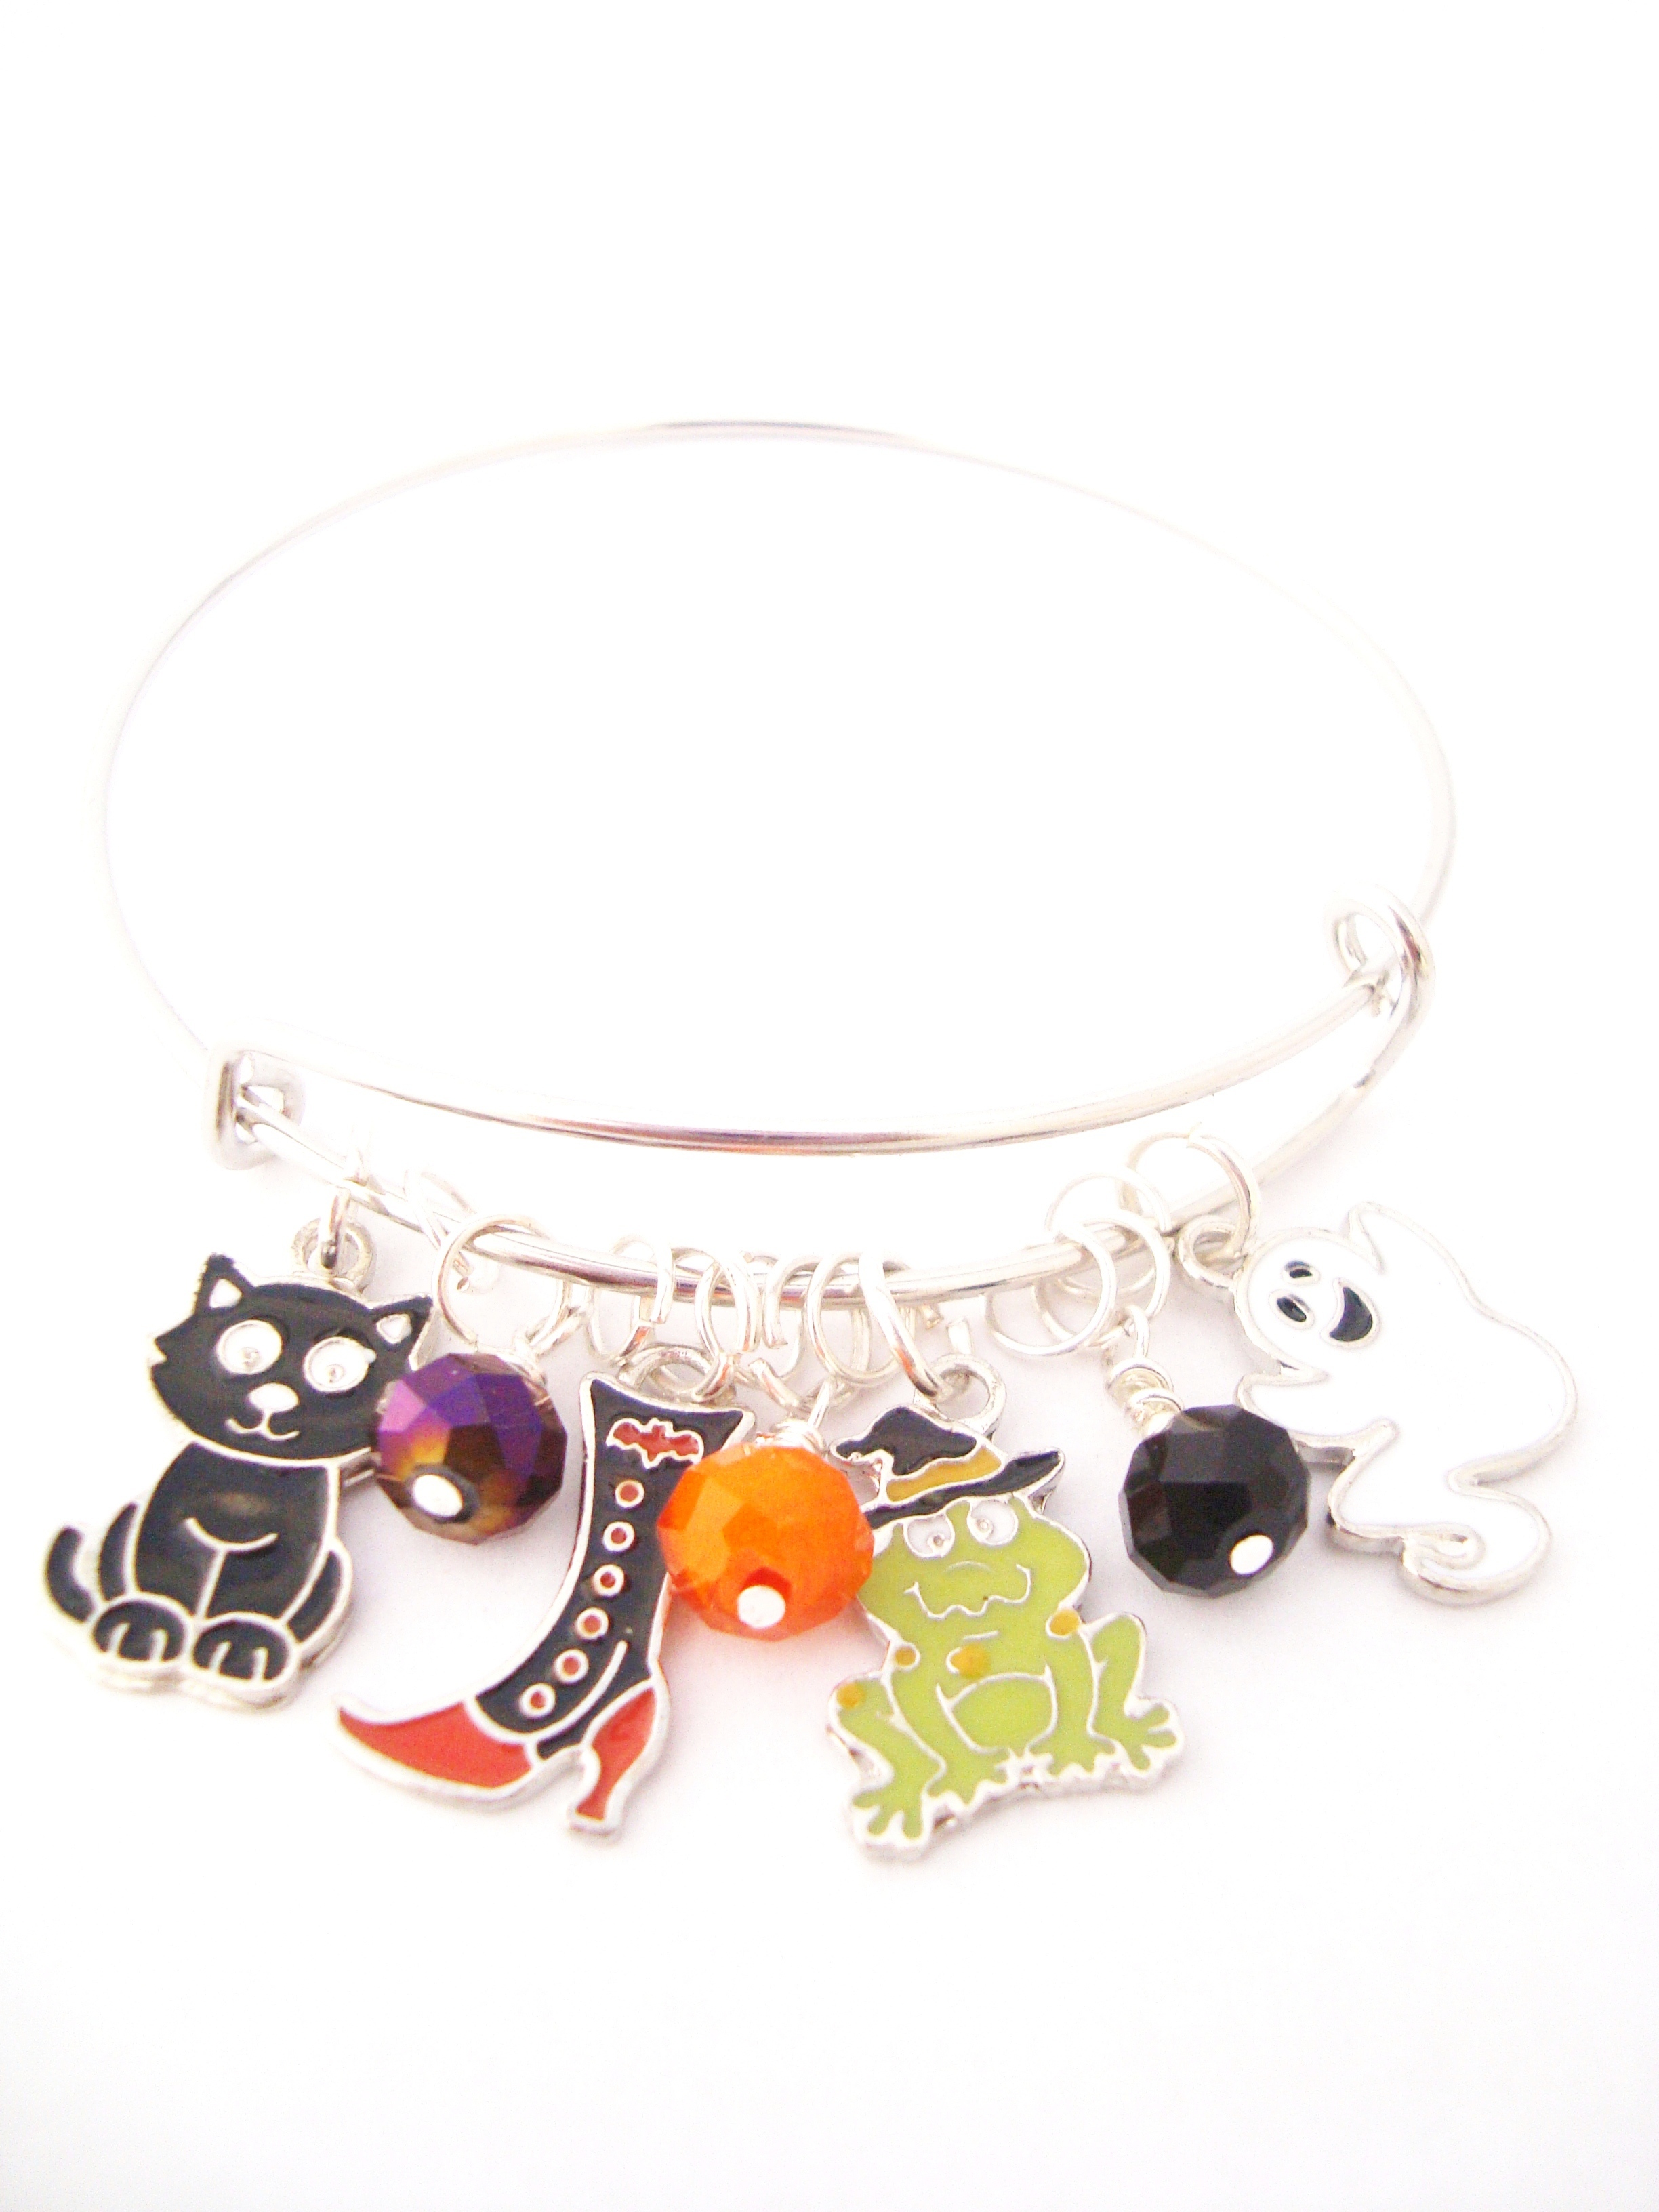 Halloween Black Cat, Toad, Witch's Boot and Ghost Charms Bangle